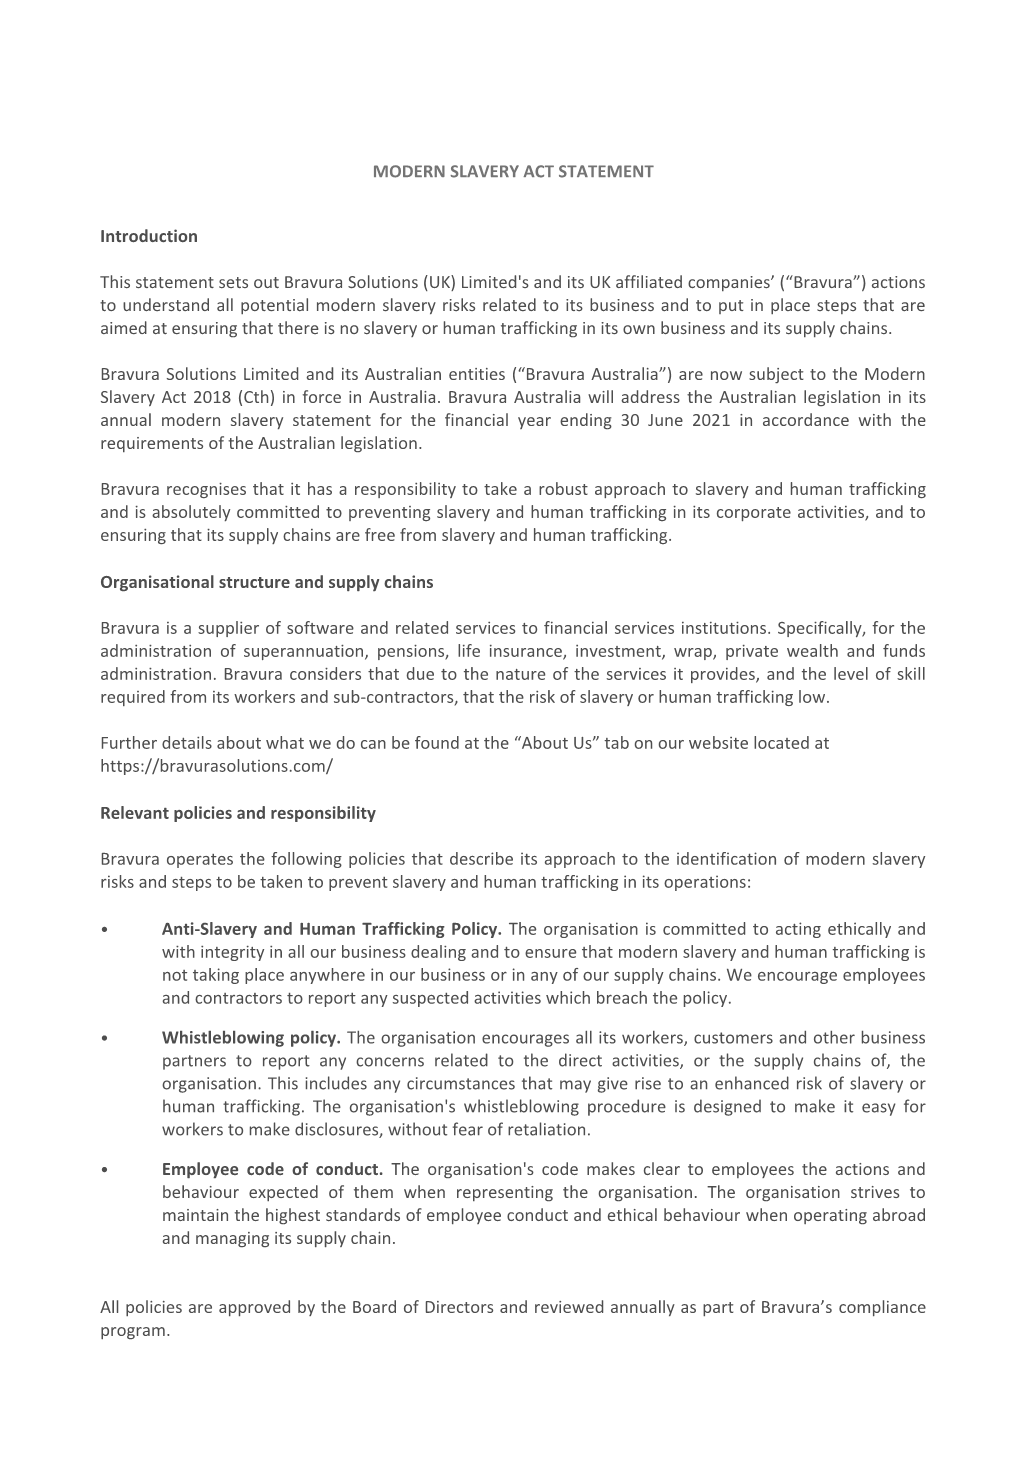 Bravura Solutions Limited and Its Australian Entities (“Bravura Australia”) Are Now Subject to the Modern Slavery Act 2018 (Cth) in Force in Australia